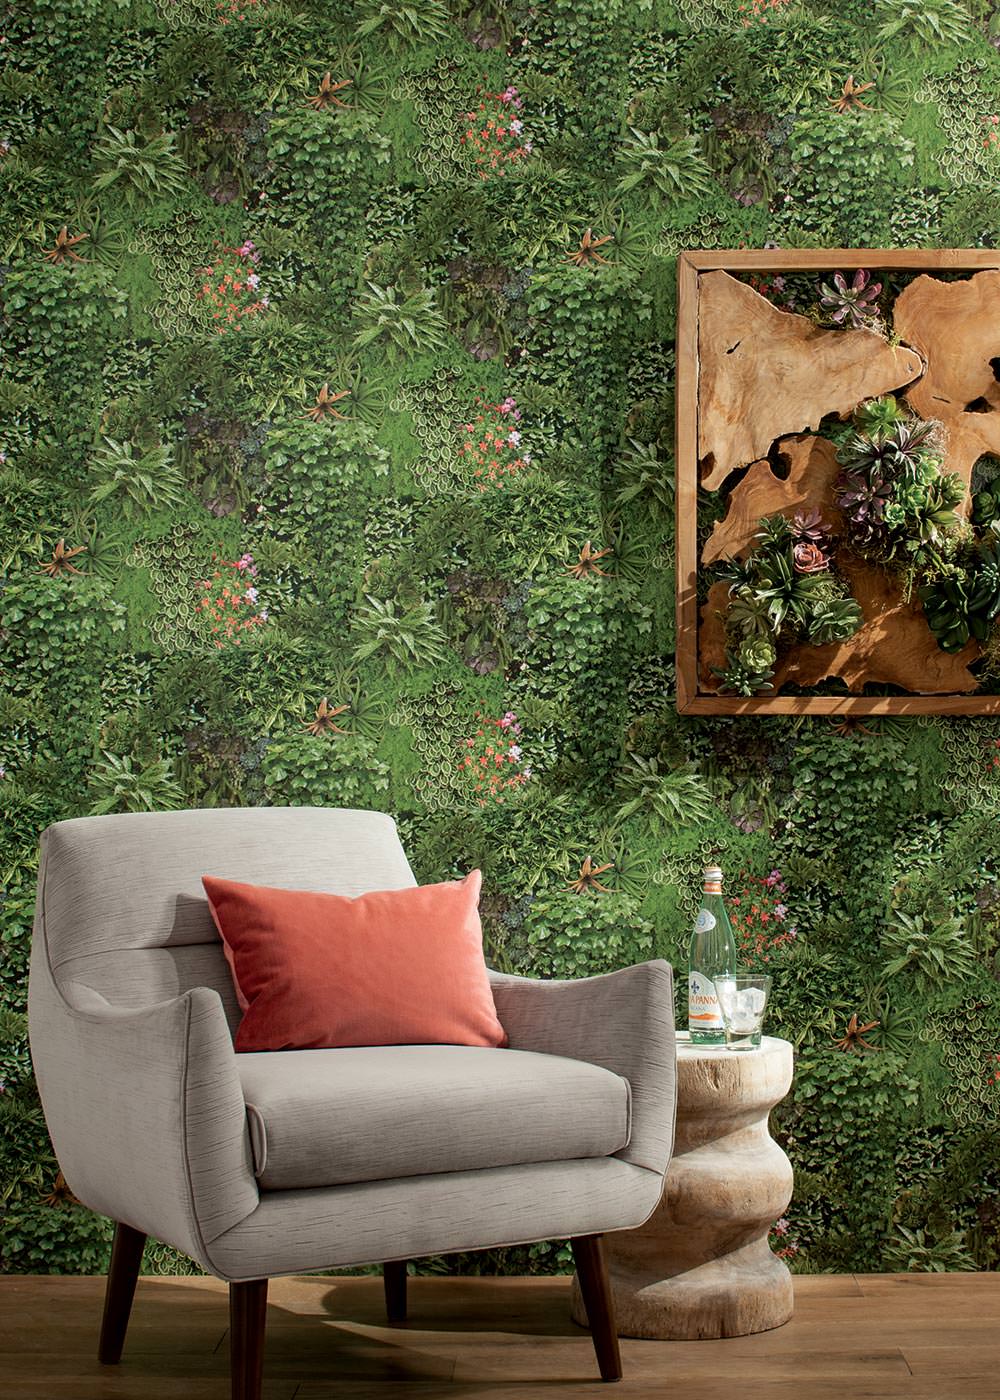 Realistic Plant Wall